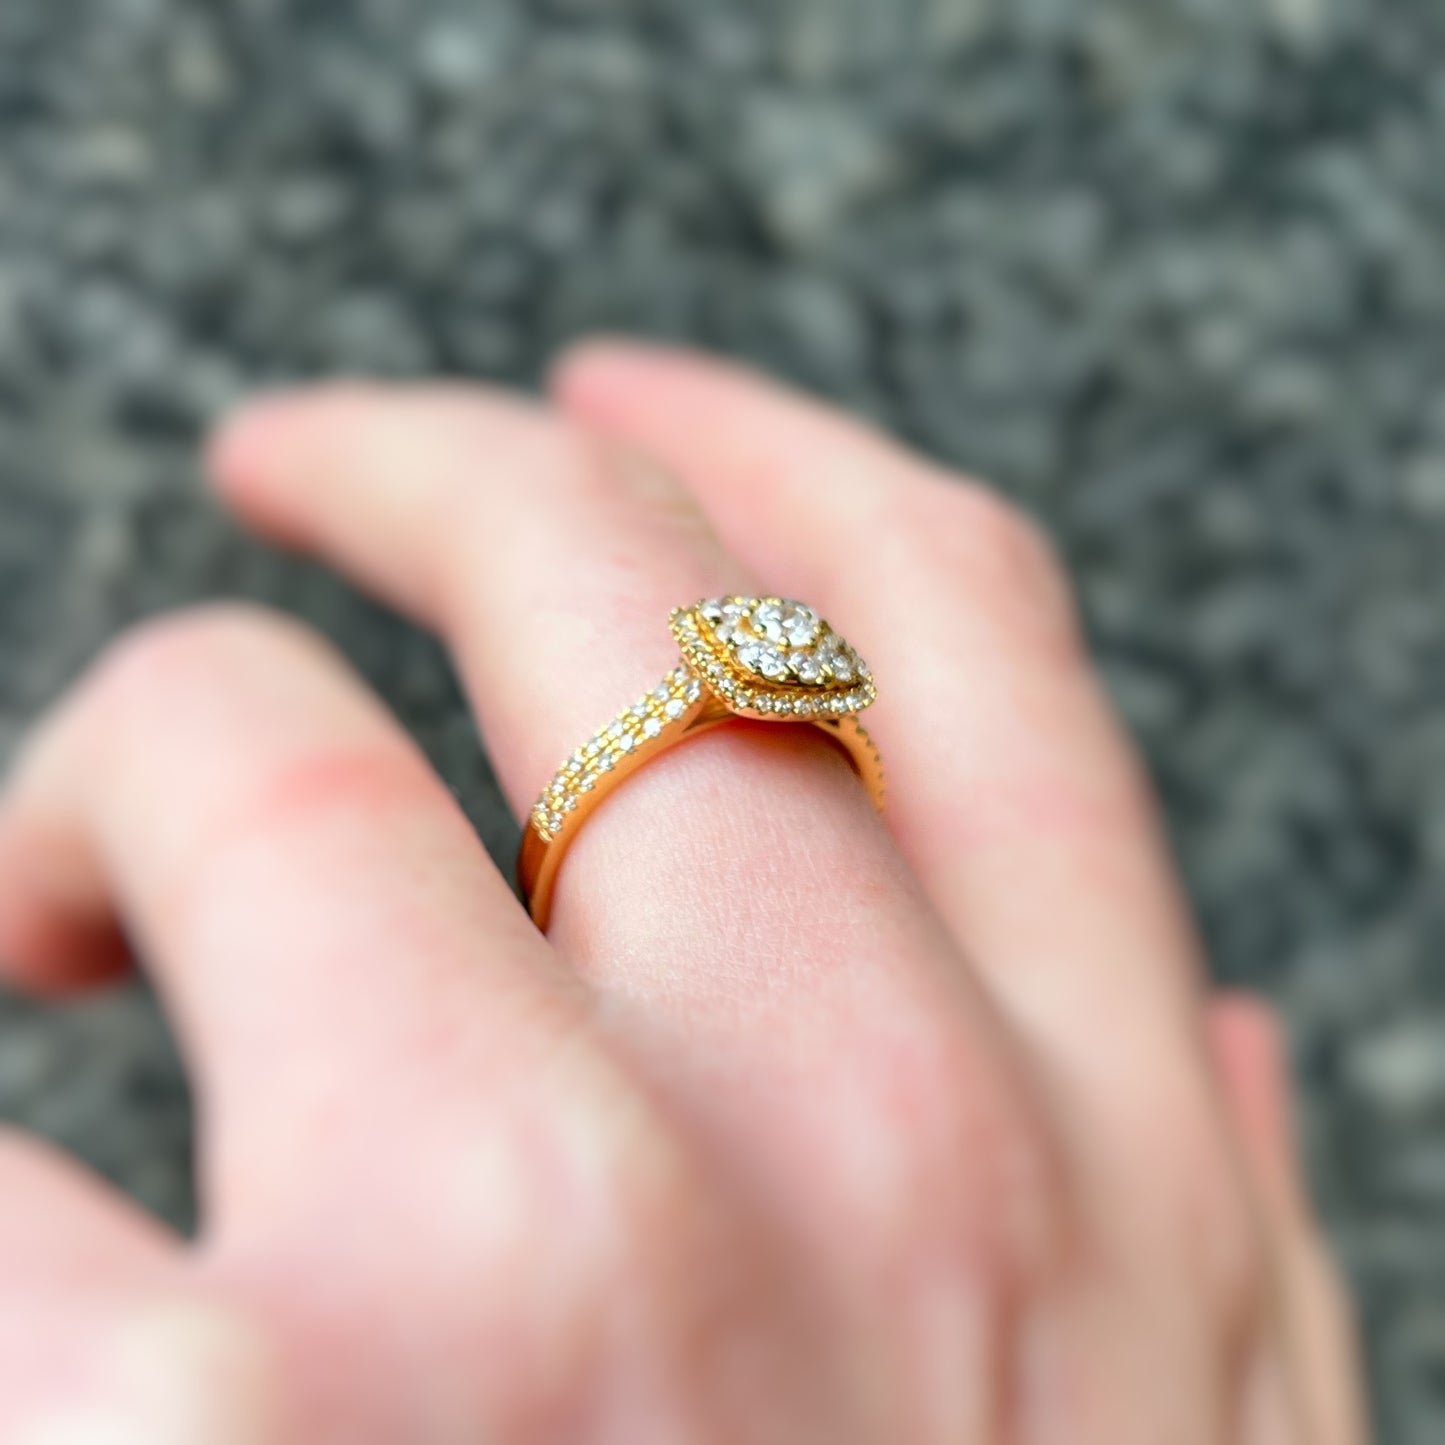 Vintage 18ct Yellow Gold Diamond Cluster Ring - Size R1/2